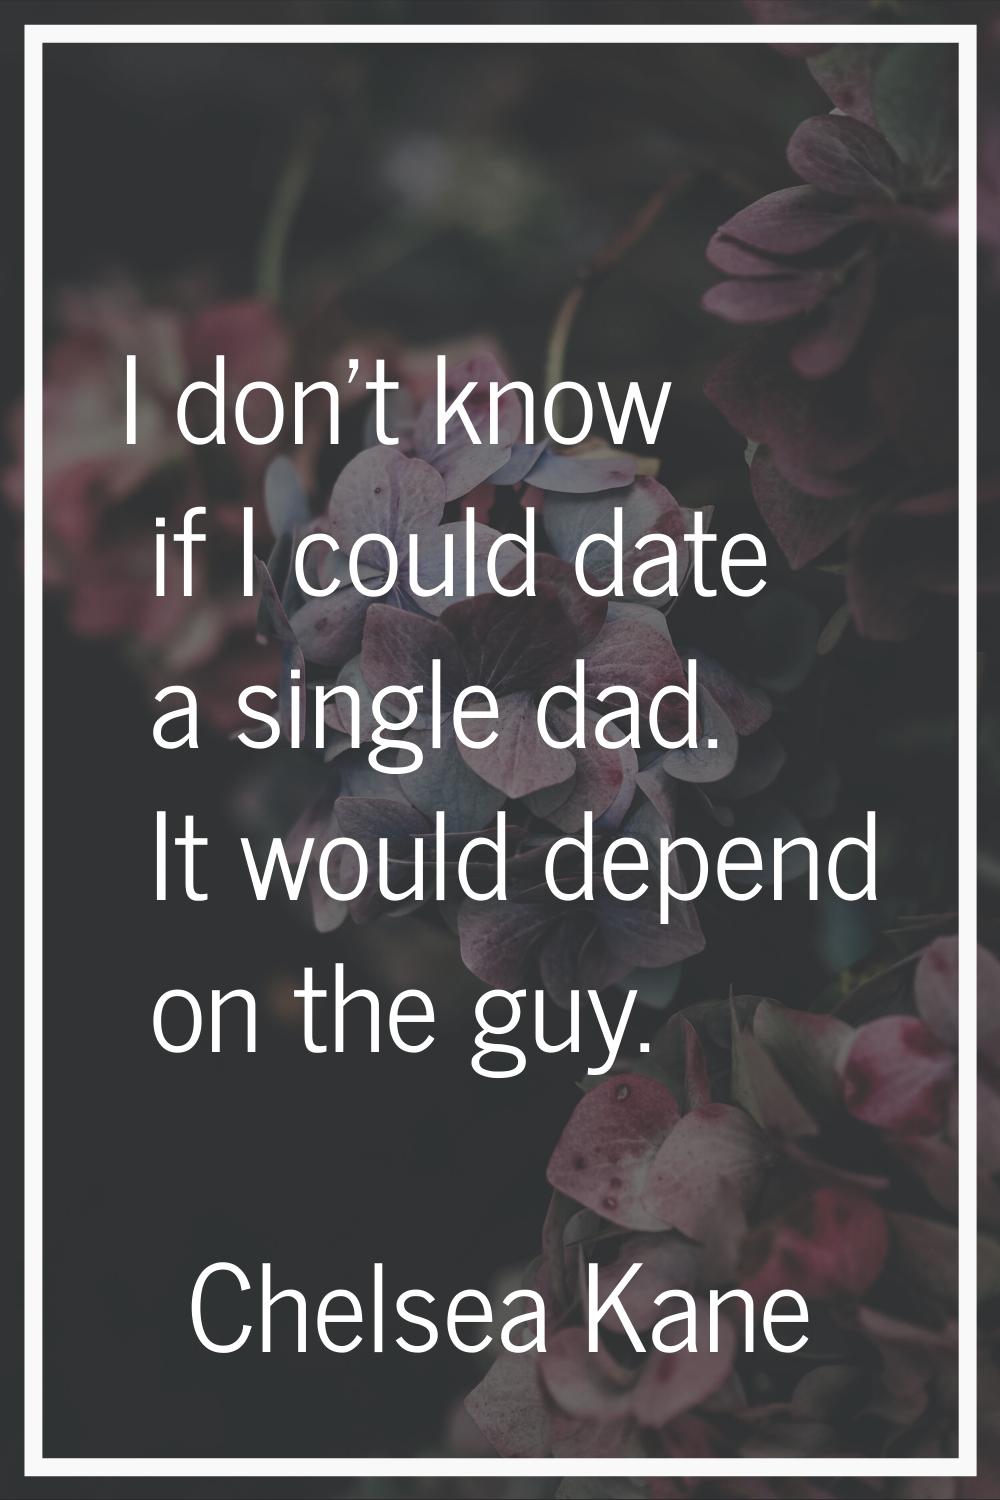 I don't know if I could date a single dad. It would depend on the guy.